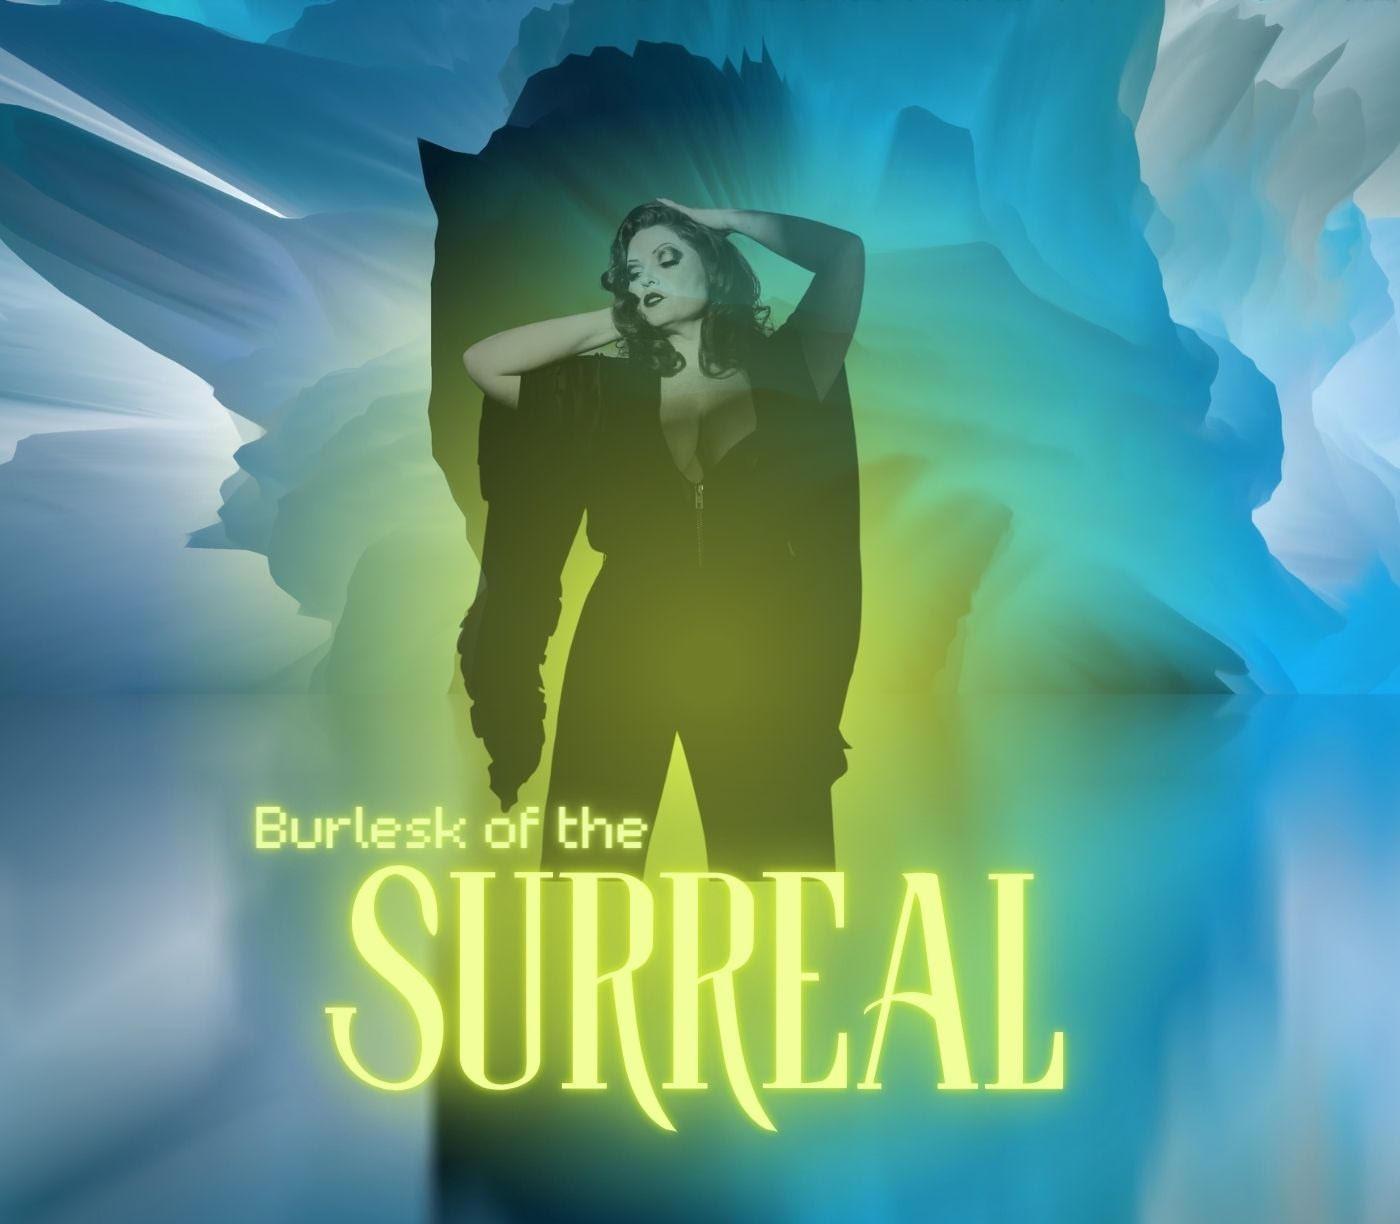 Burlesk of The Surreal